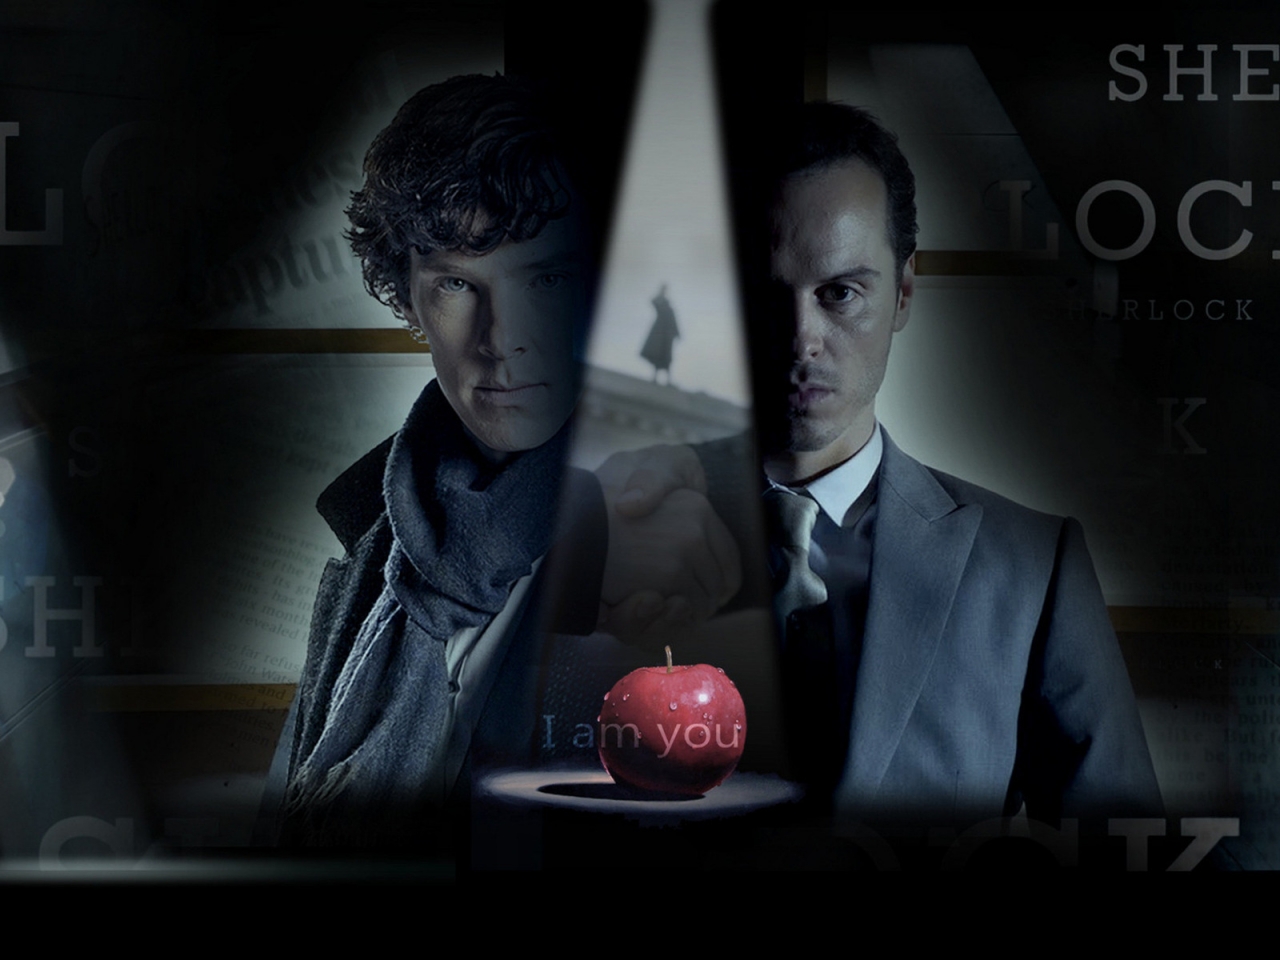 Sherlock and Moriarty for 1280 x 960 resolution